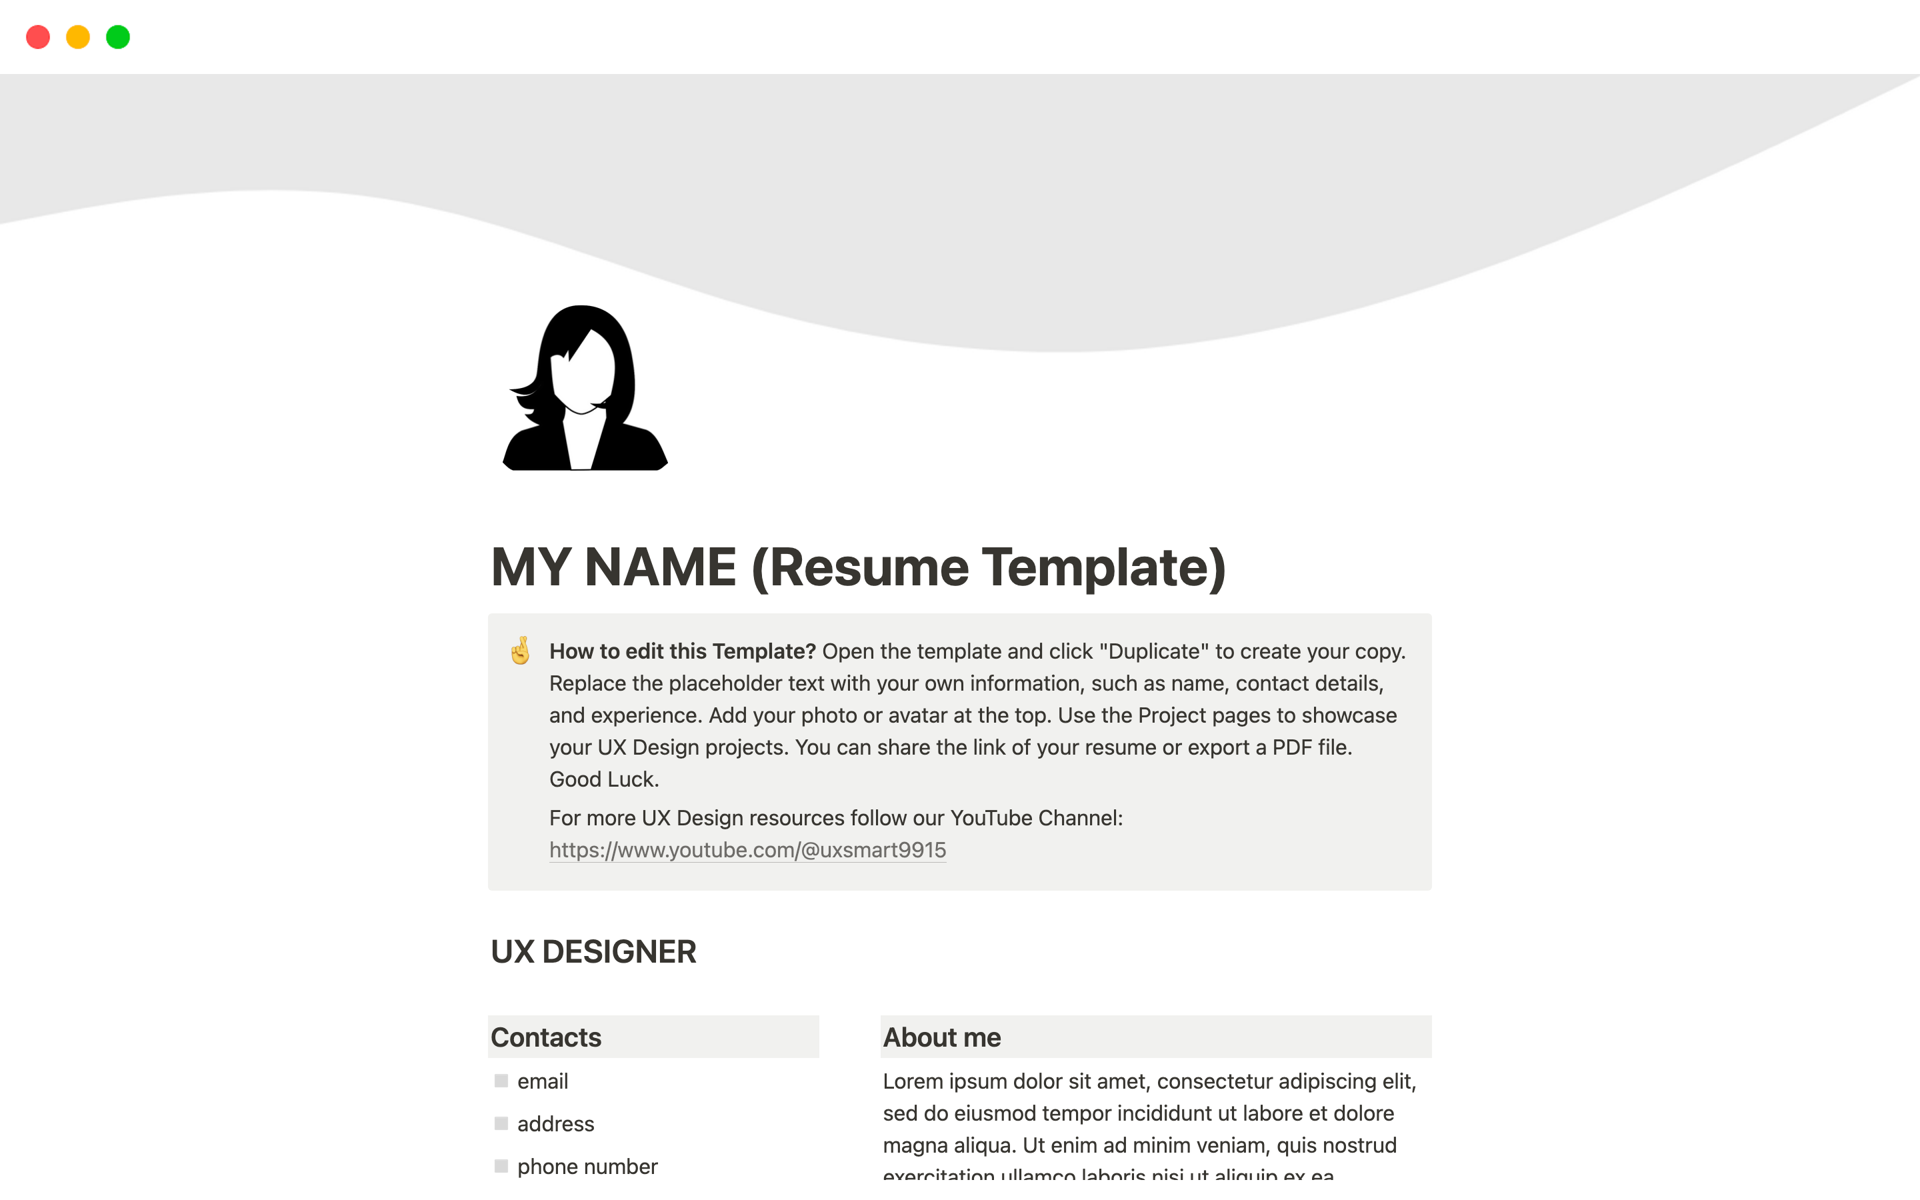 This UX Designer Resume Template is designed to help you create your resume easily and effectively.